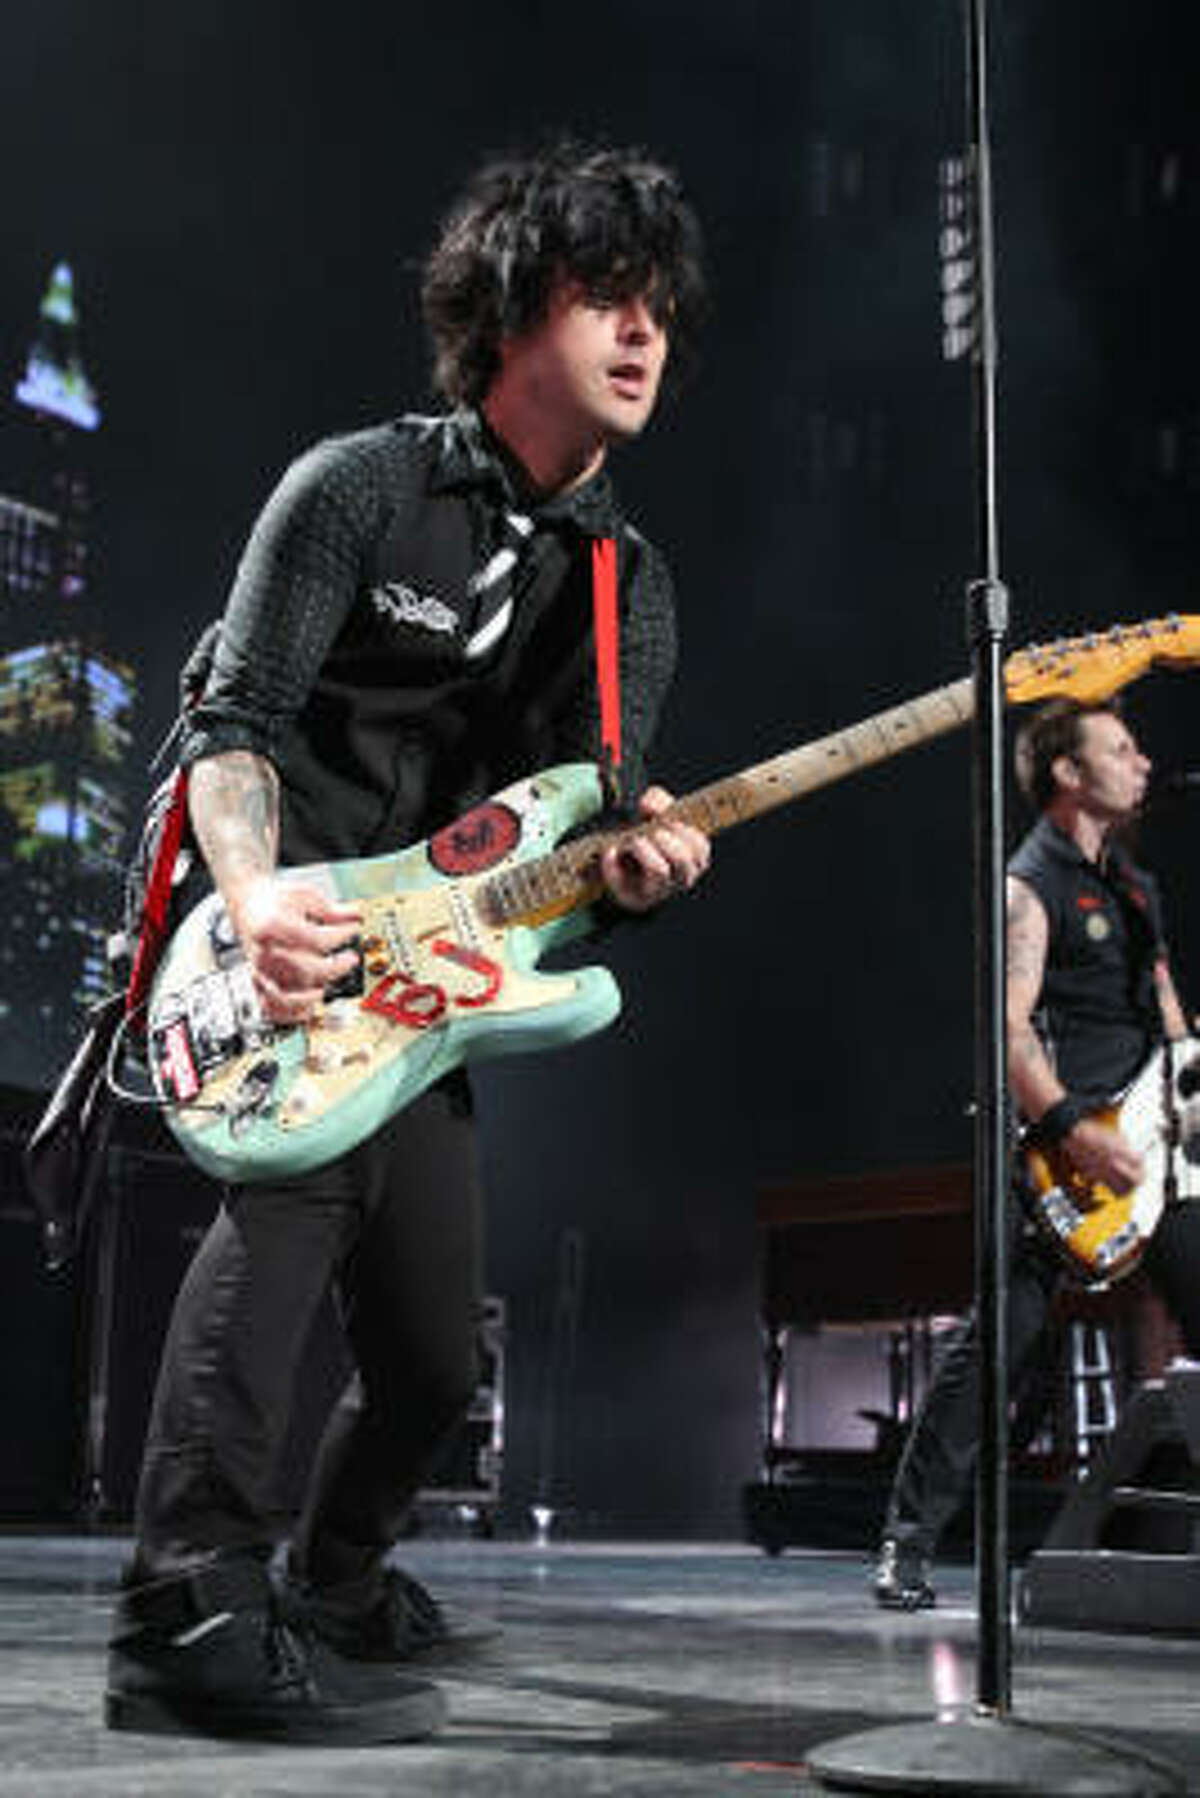 Frontman Billie Joe Armstrong. Read the review here.